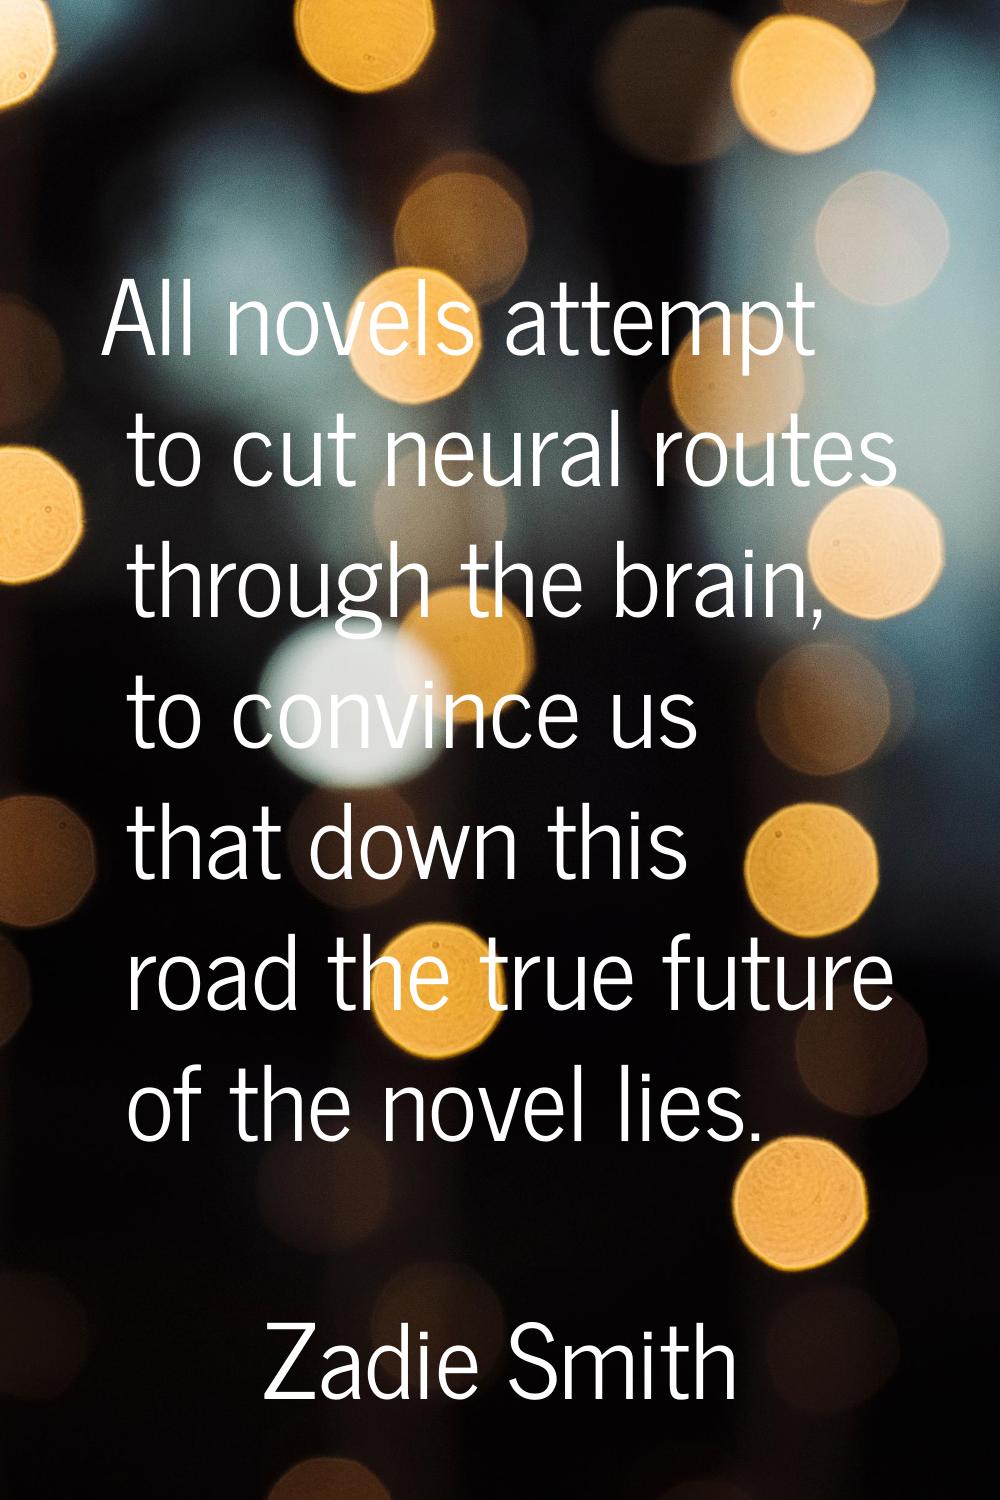 All novels attempt to cut neural routes through the brain, to convince us that down this road the t